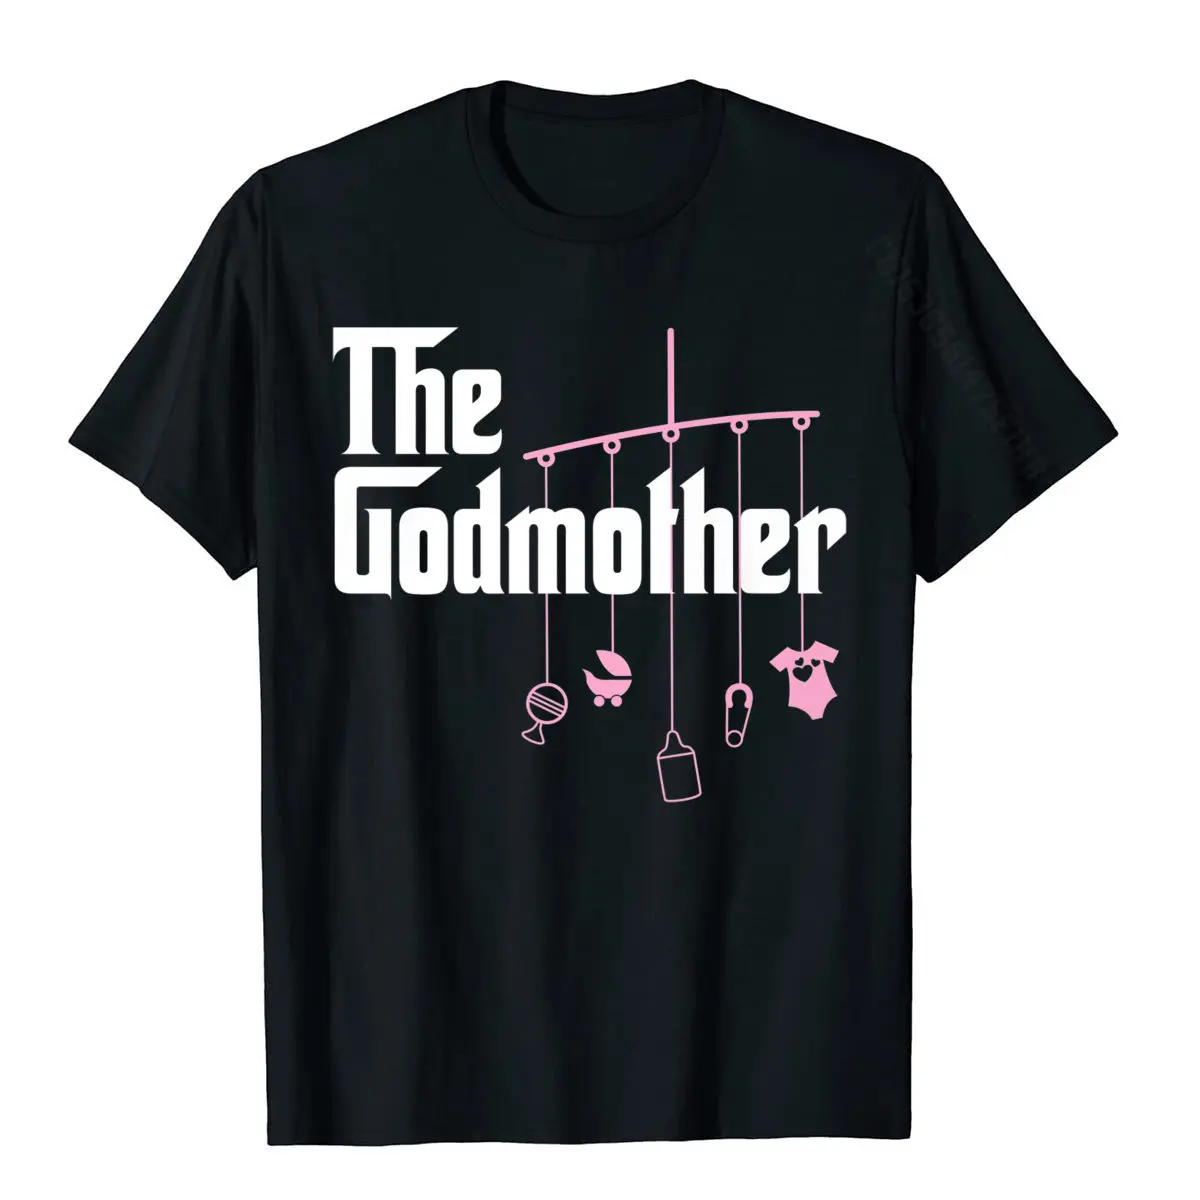 2021 New Fashion Slim Fit Normal Short Sleeve T Shirt Summer Autumn Crewneck Pure Cotton Tees for Boys Tops & Tees Personalized The Godmother of New Baby Gir Funny Pun Gift Premium T-Shirt__910 black